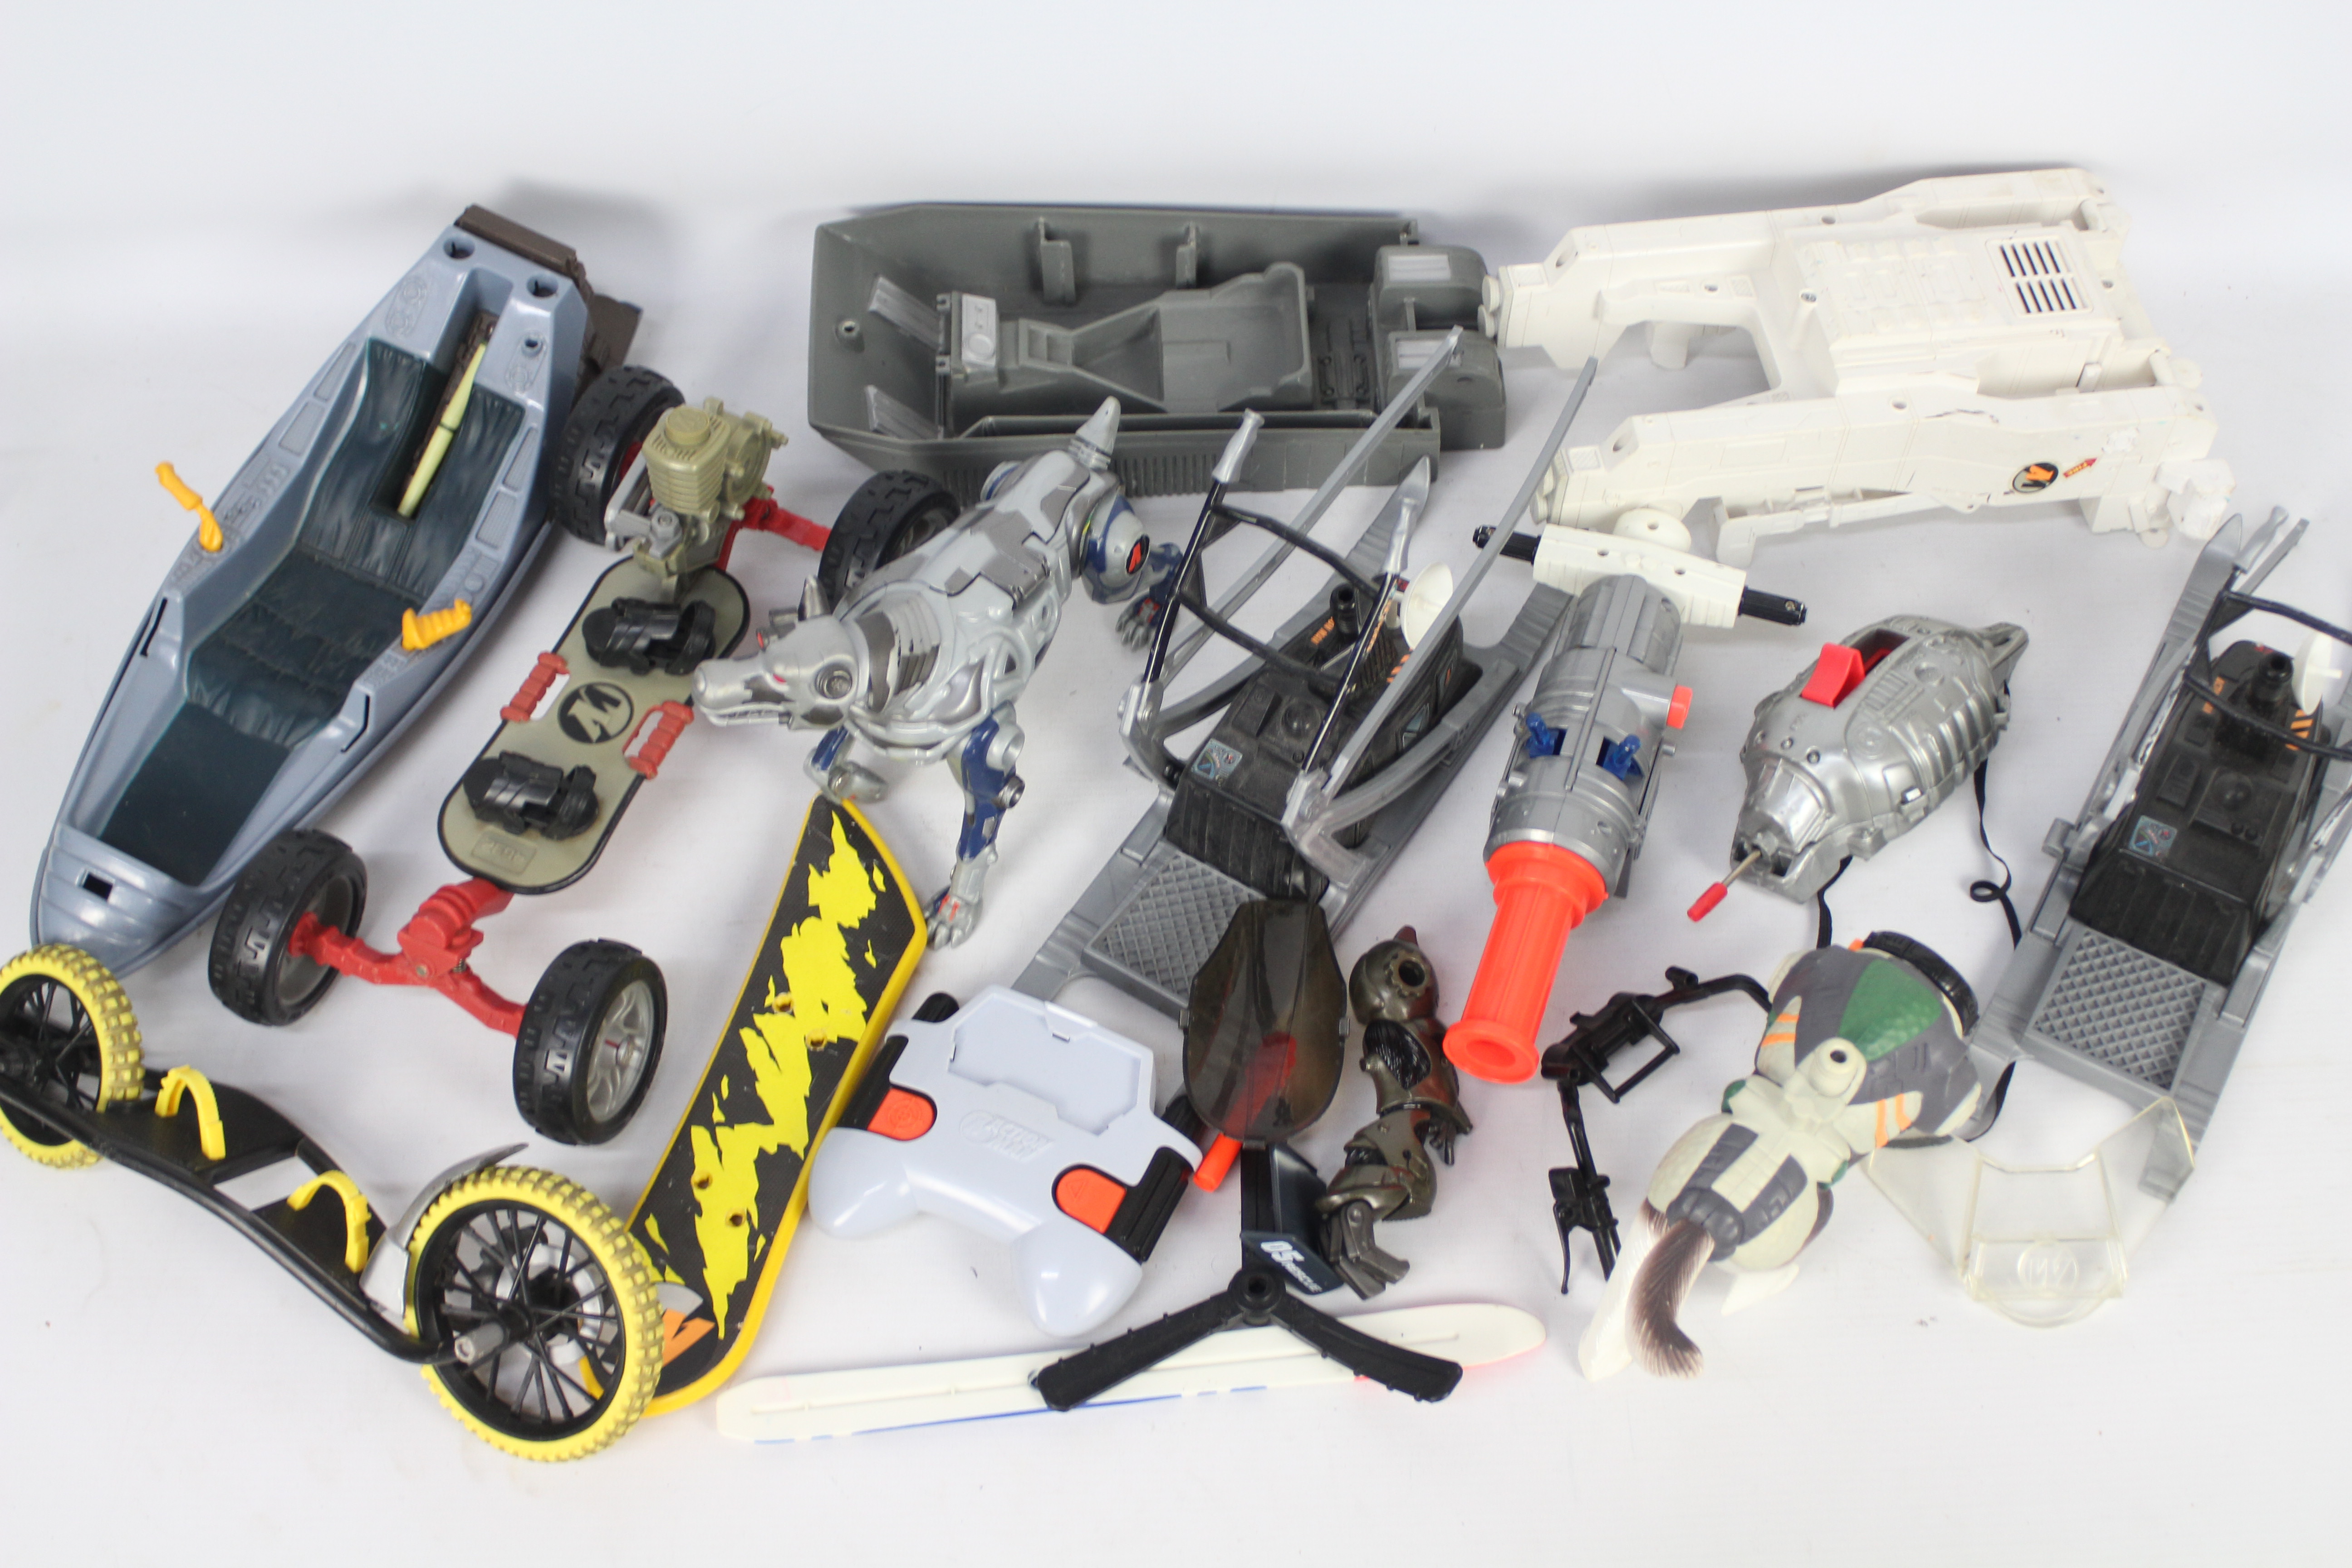 Hasbro - Action Man - A group of Action Man related figures and vehicles including 2 x Explorers